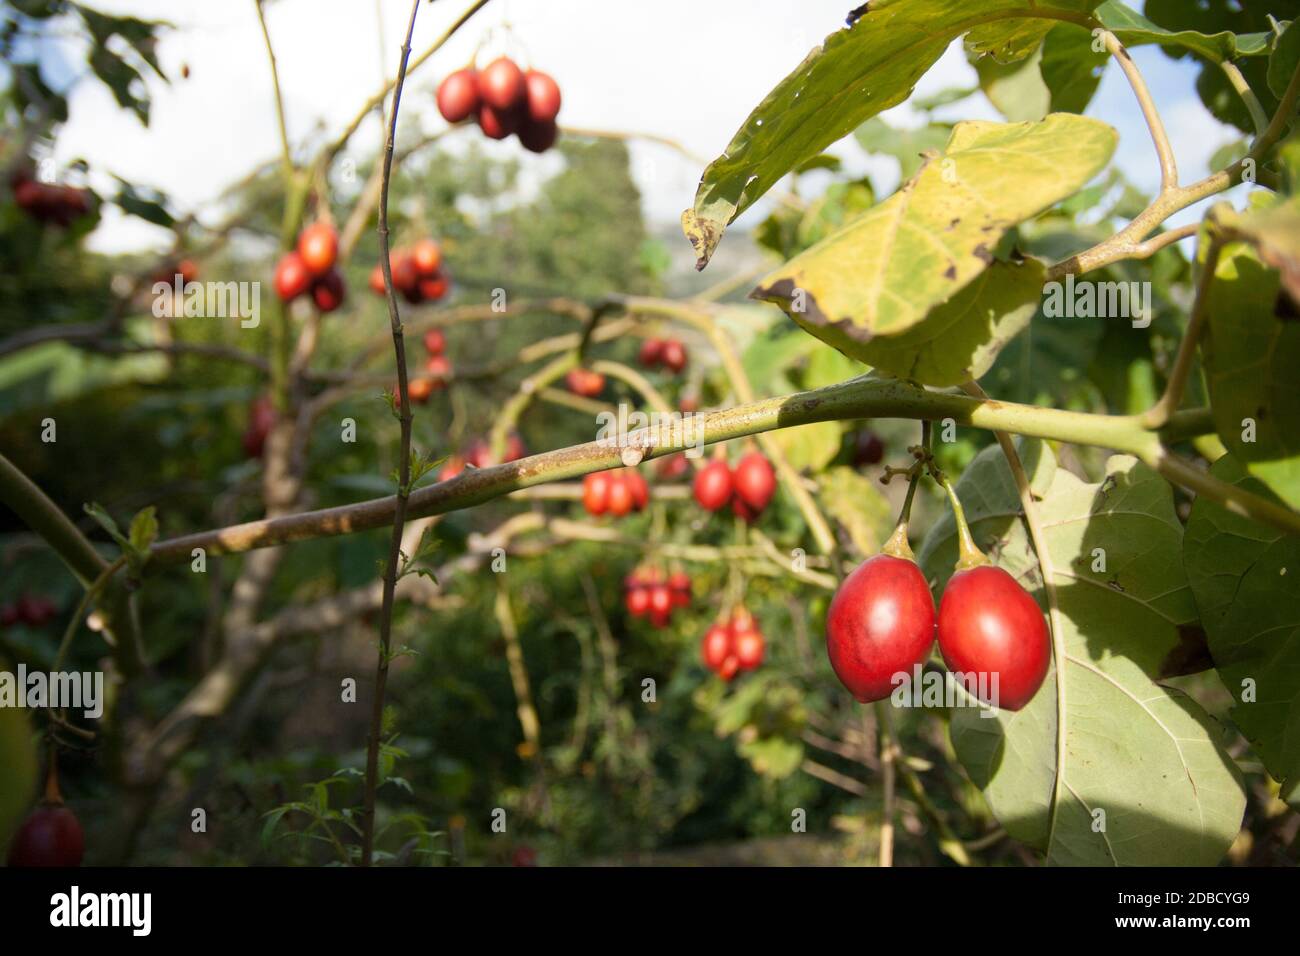 Tamarillo, Cyphomandra crassicaulis. This original shrub can produce elongated tomatoes. Primarily used for food in its native region, South America. Stock Photo